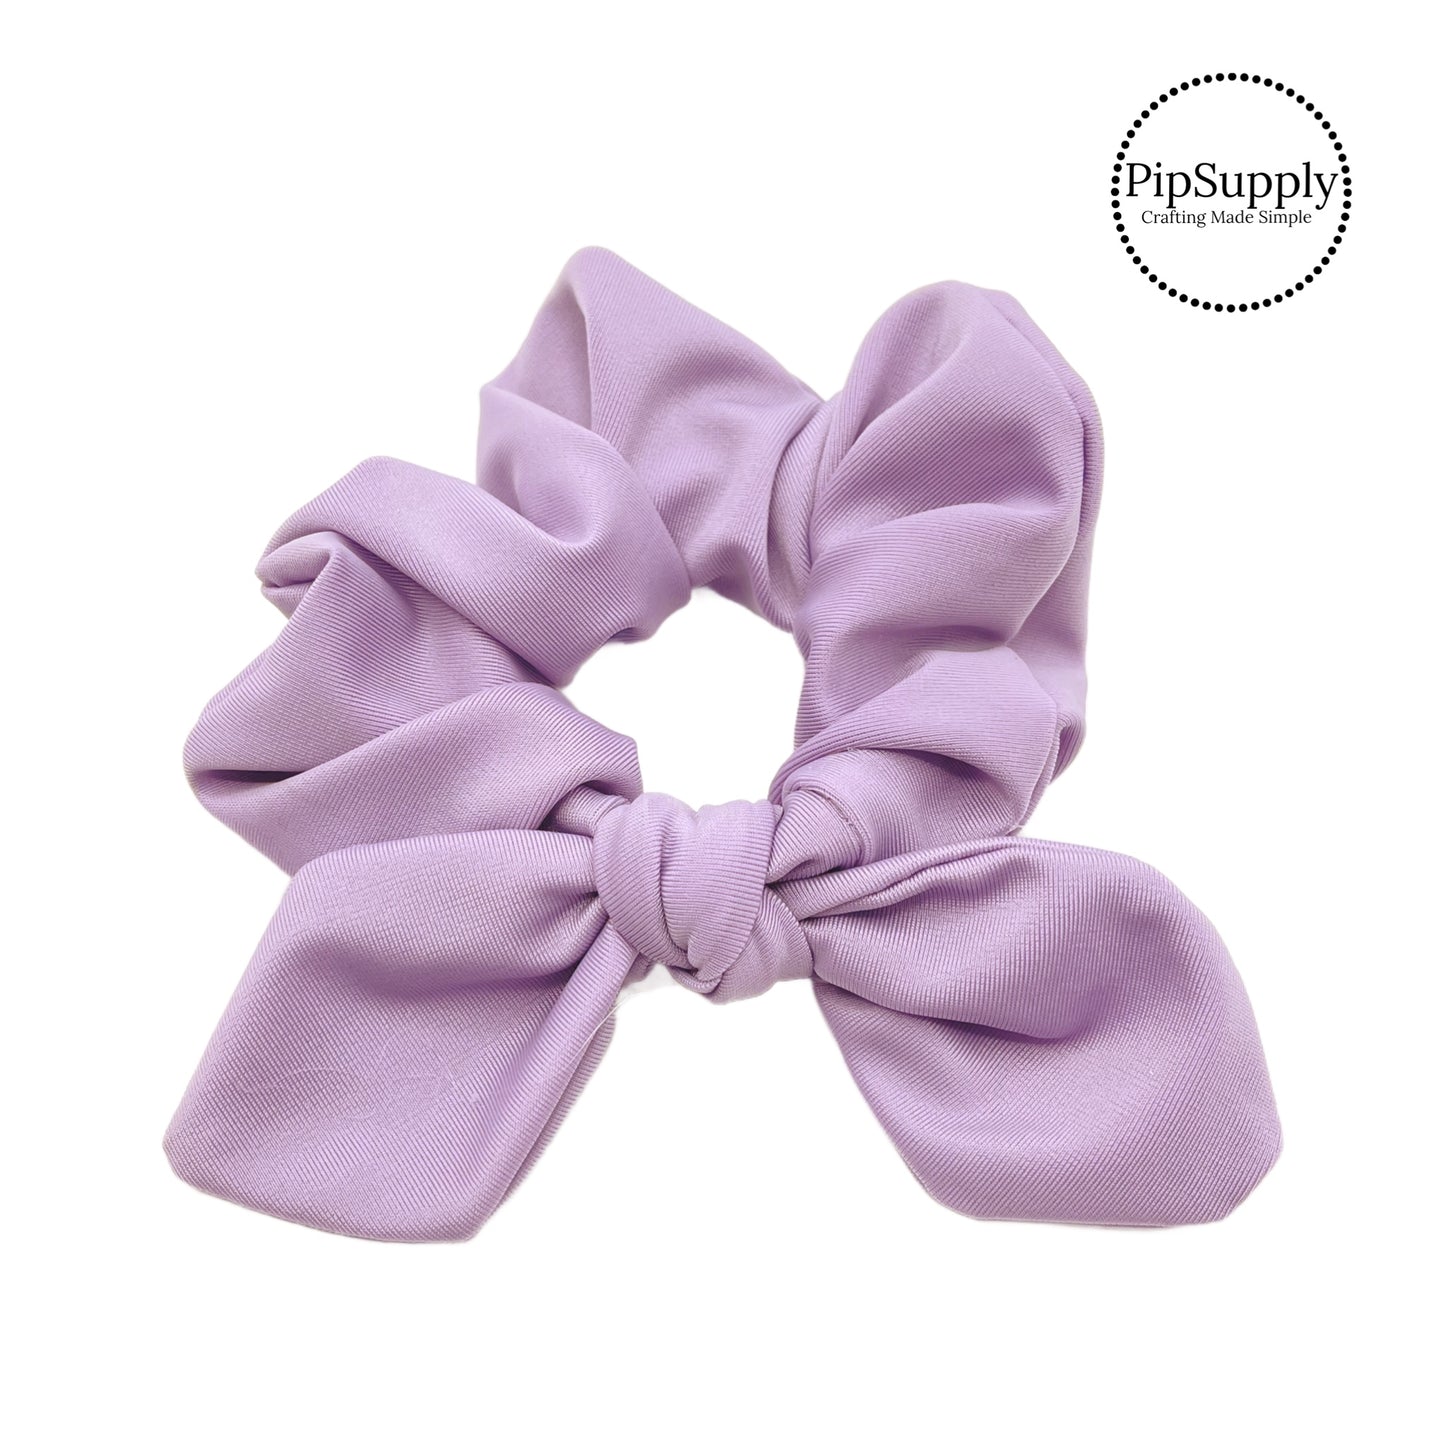 These lavender swim scrunchies have a two layer swimsuit fabric strip with edges that are securely folded and sewn providing a professional and high quality seam. Fabric is thick high quality not coarse or stiff with elastic band sewn inside for stretch-ability. Pattern visible on all sides. Bow comes pre-tied on scrunchie however is removable to be available as separate bow.